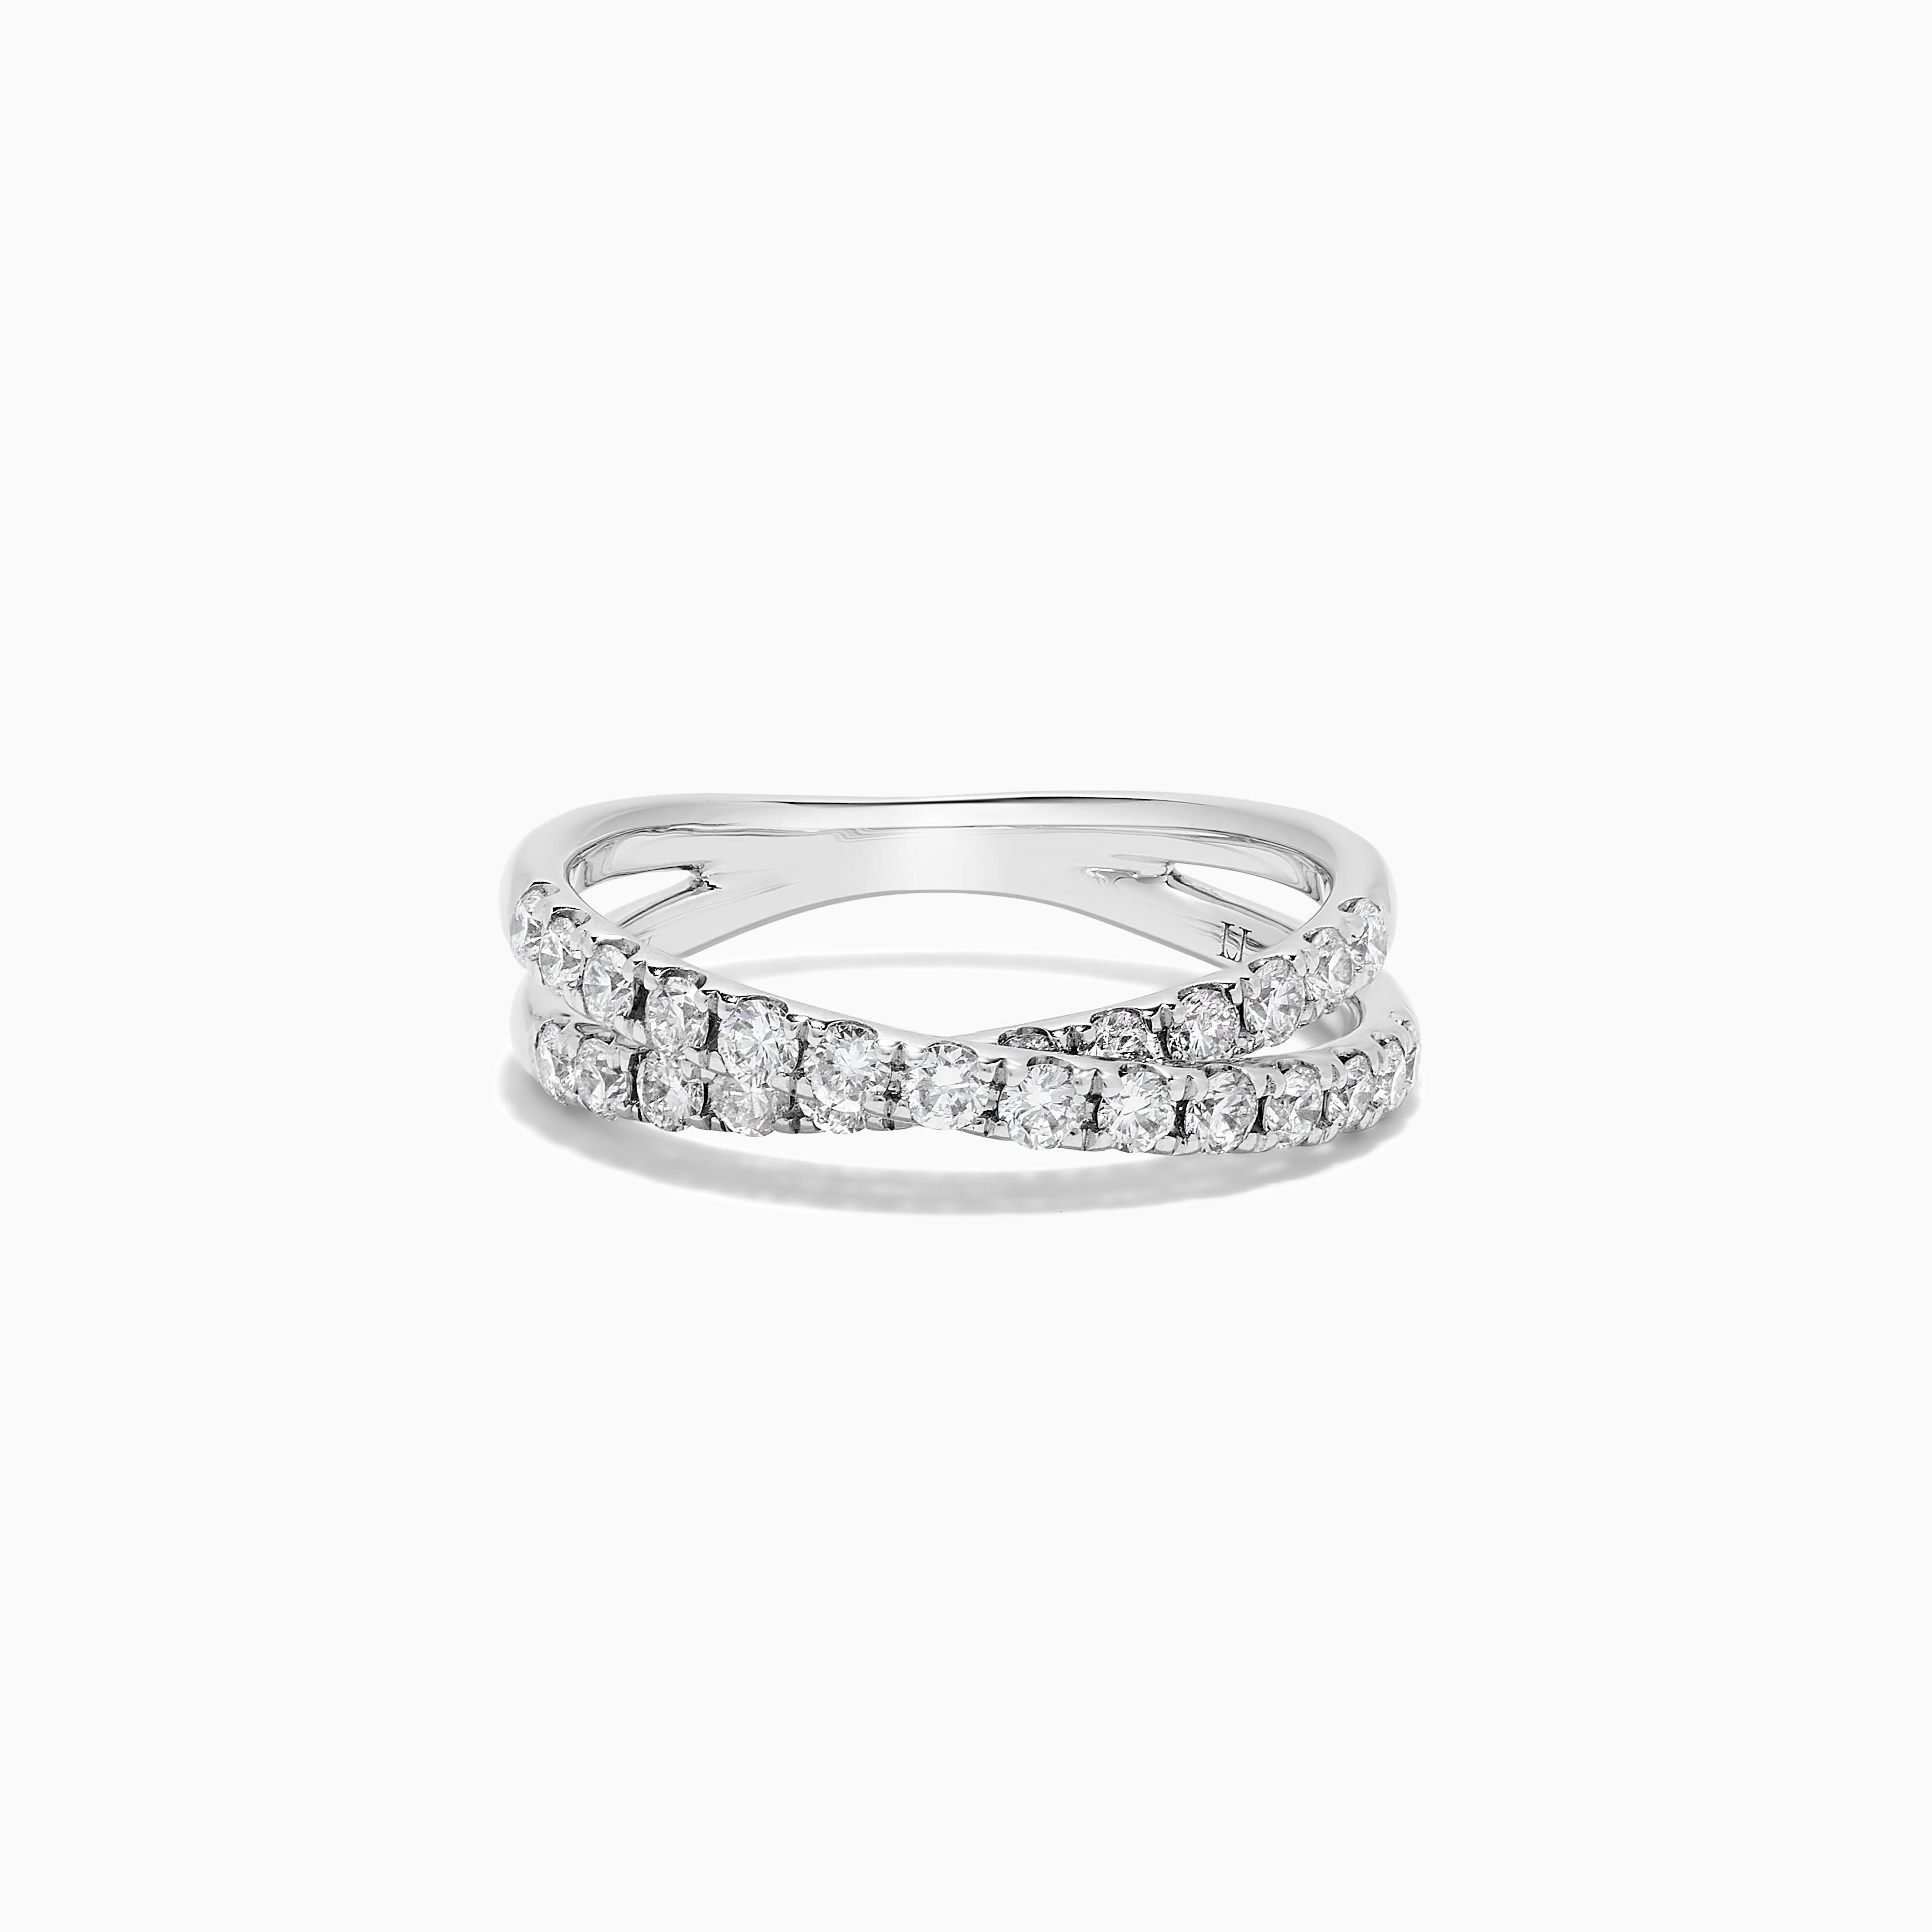 RareGemWorld's classic diamond band. Mounted in a beautiful 18K White Gold setting with natural round white diamond melee. This band is guaranteed to impress and enhance your personal collection!
Total Weight: .69cts
Length: 21.2 x 4.5 mm
Shank